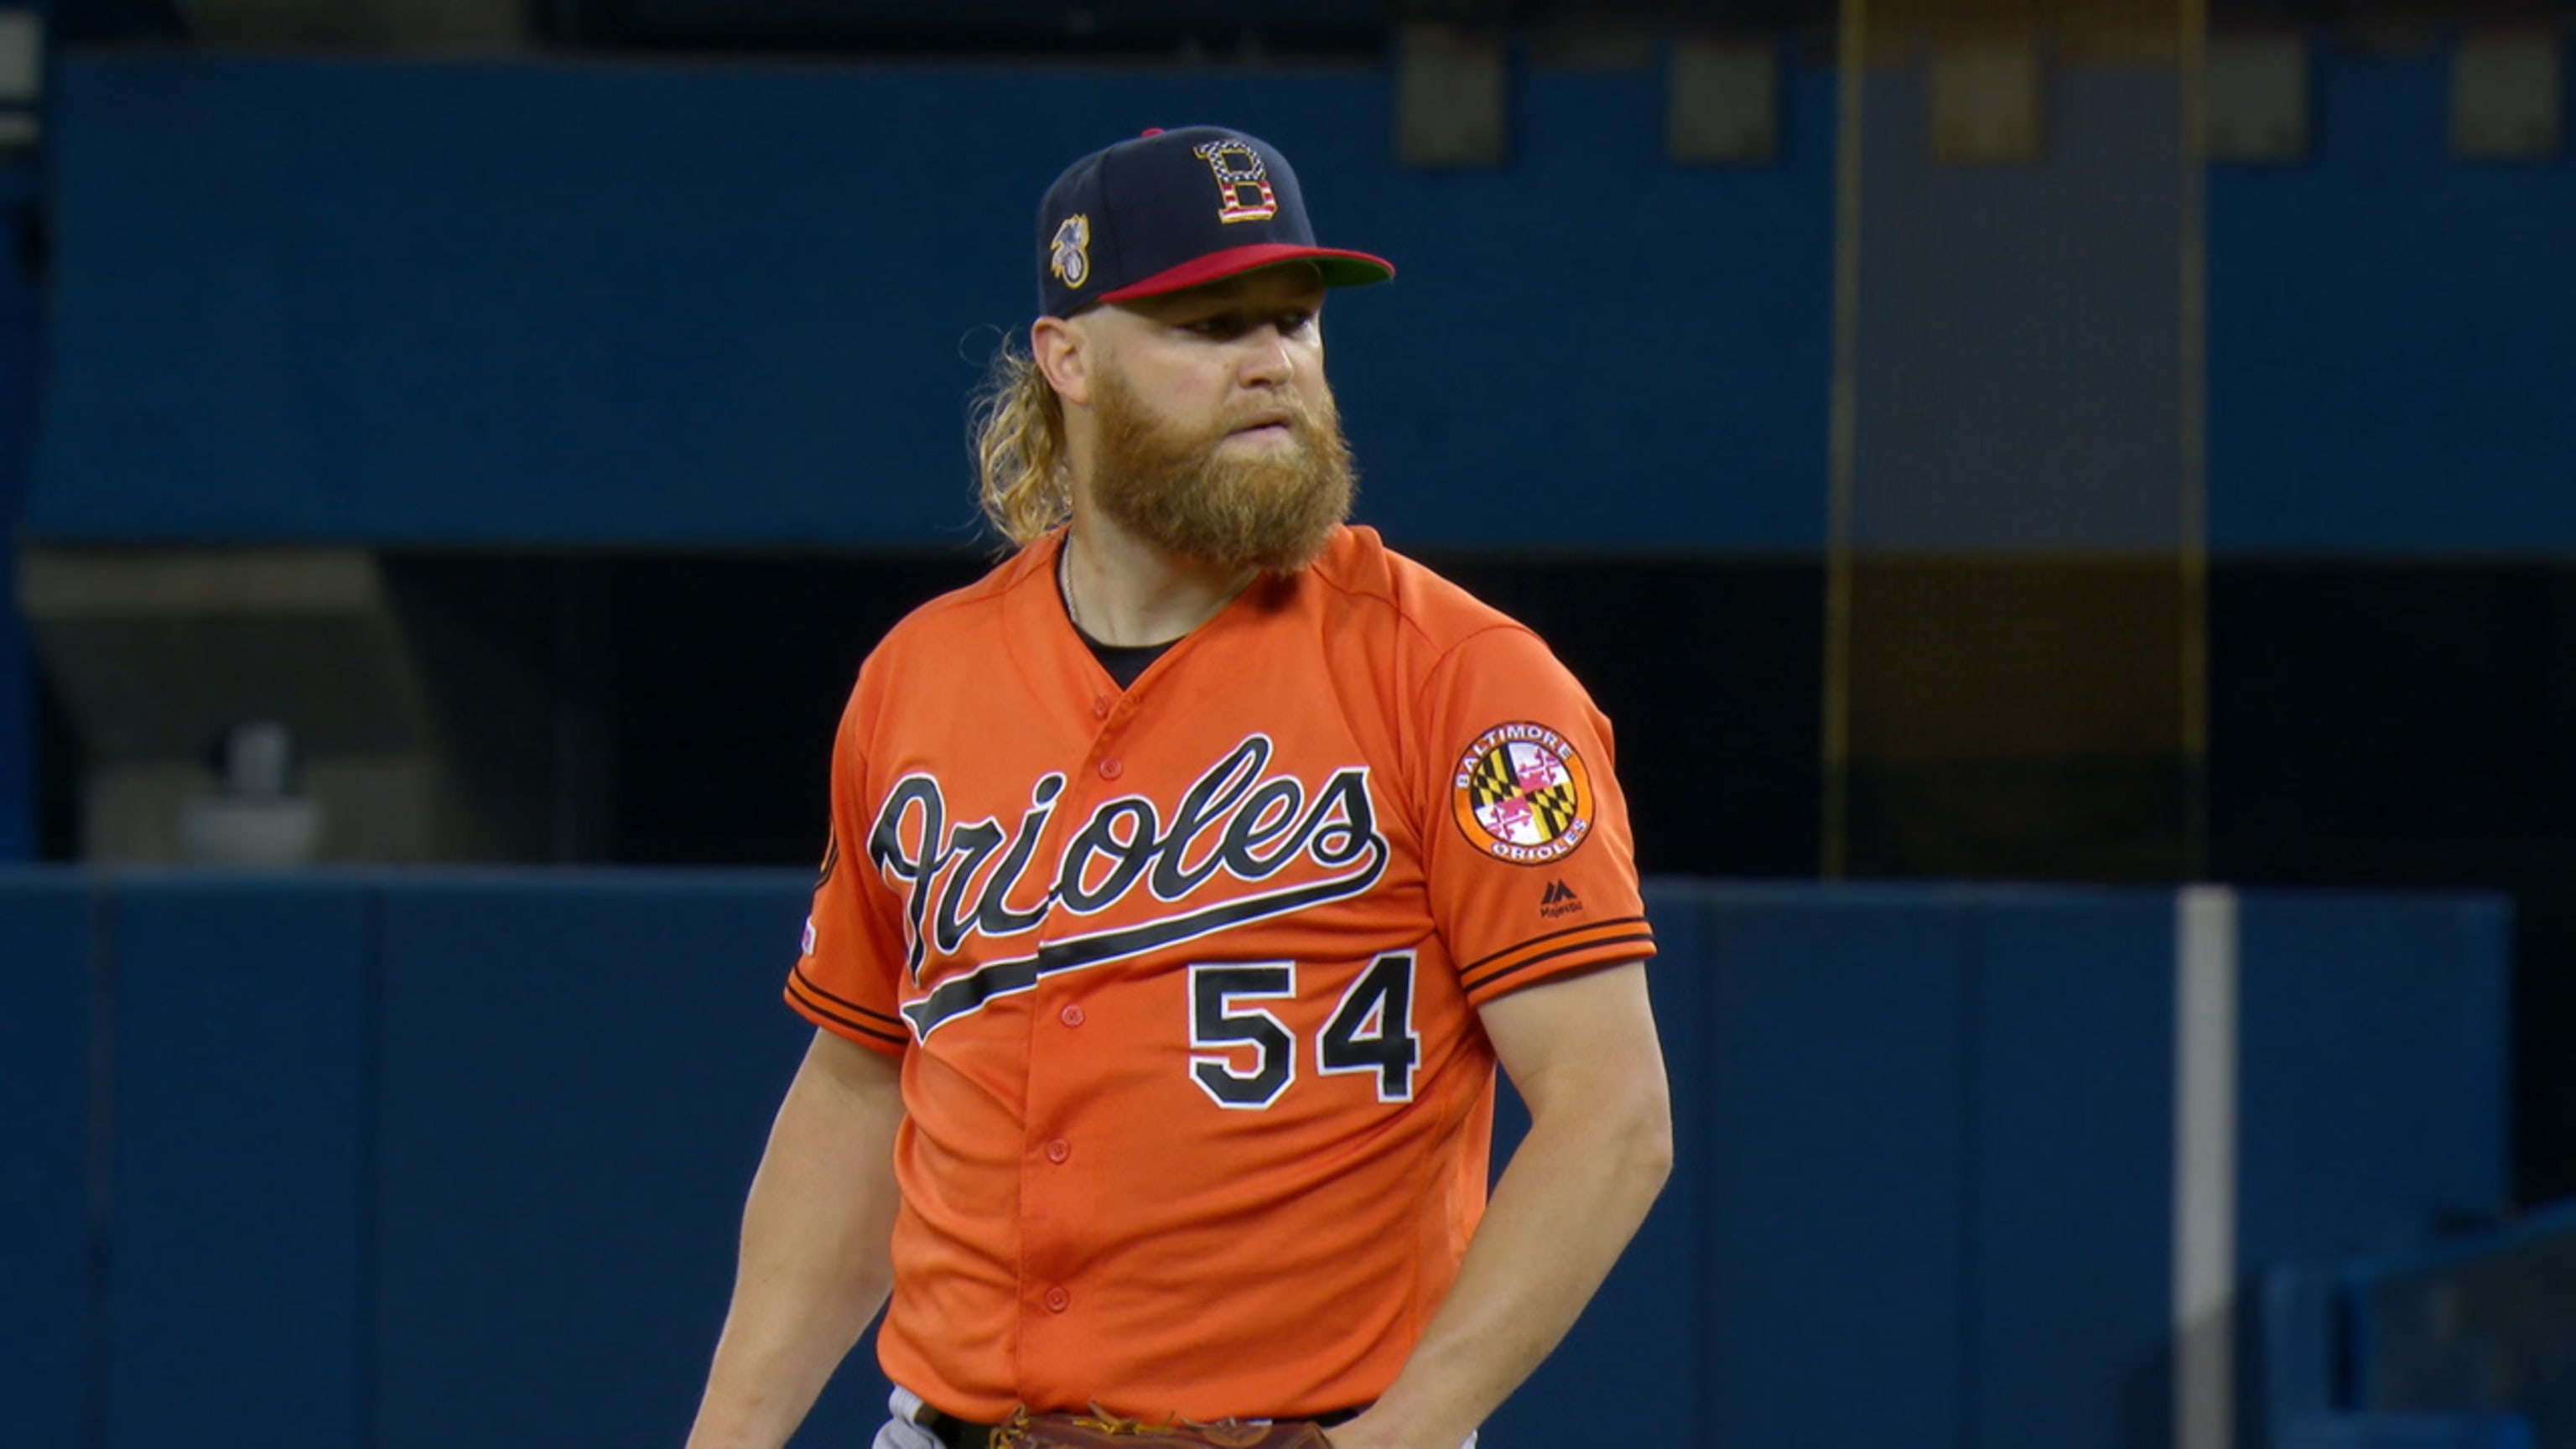 Red Sox add starting pitcher Andrew Cashner in trade with division